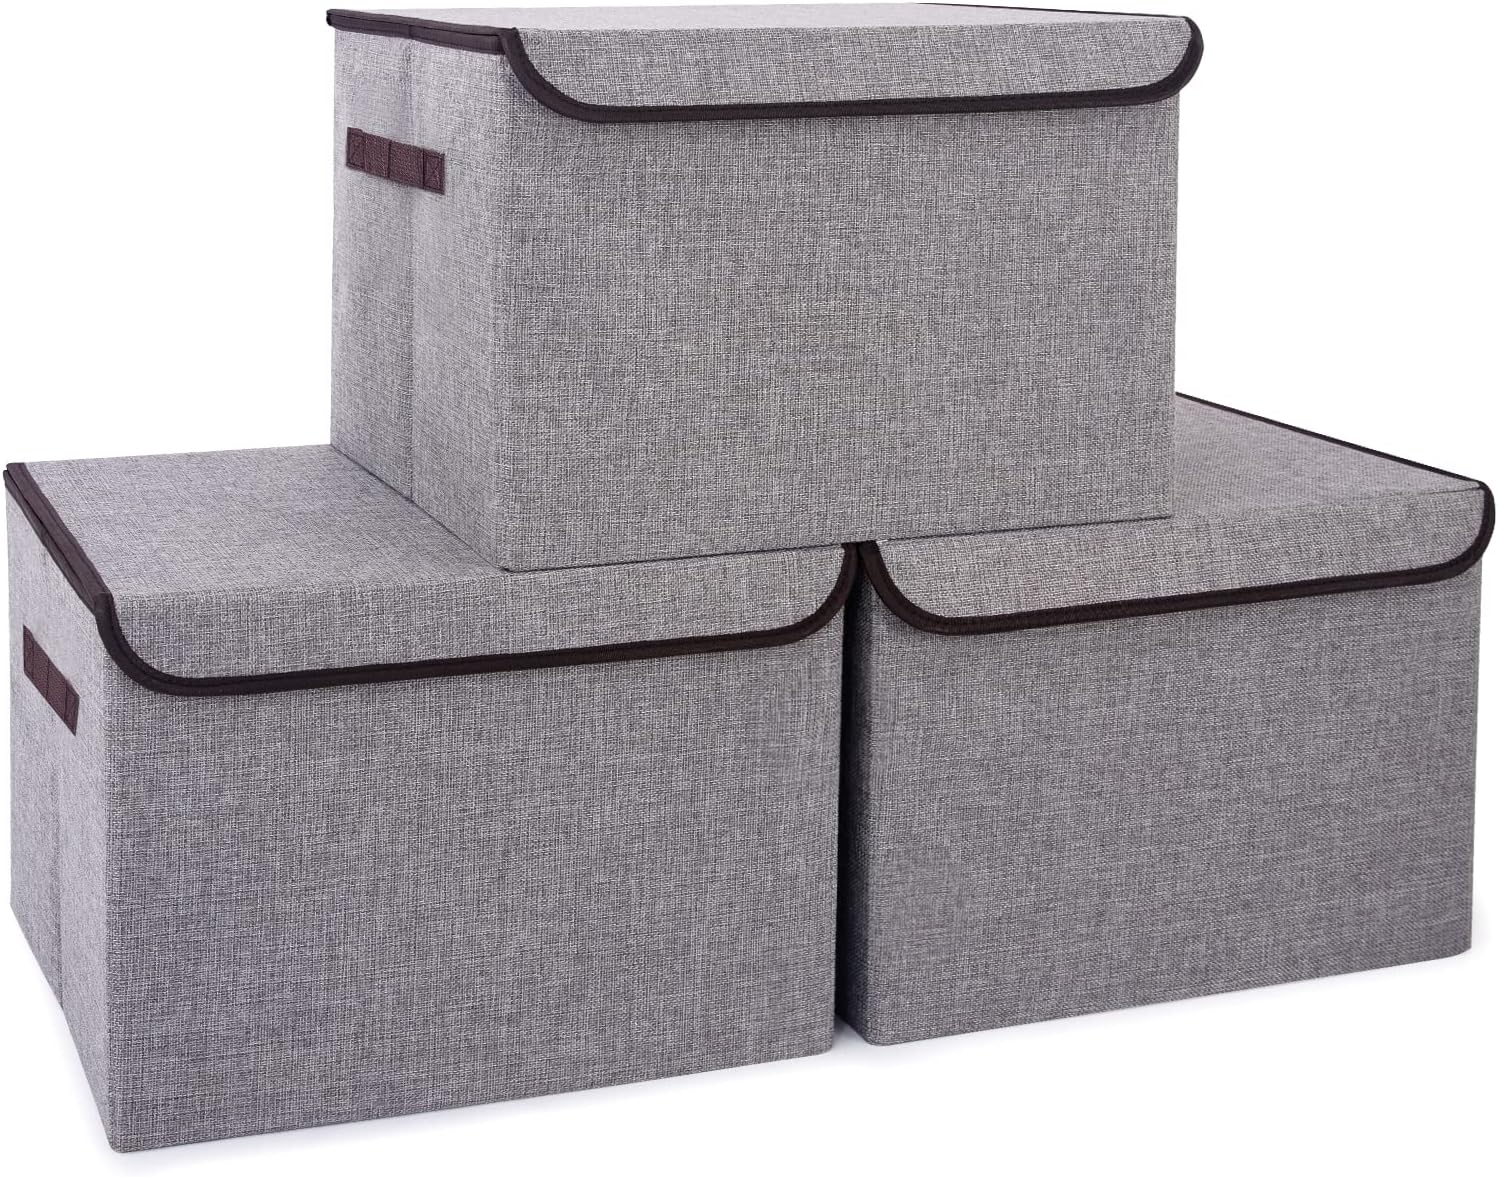 Large 17 42 Quarts Collapsible Stackable Storage Bins with Lids [3-Pack] Foldable Fabric Linen Storage Boxes Cube, Closet Organizer Baskets with Label for Home (16.7 x 12 x 12, Gray)